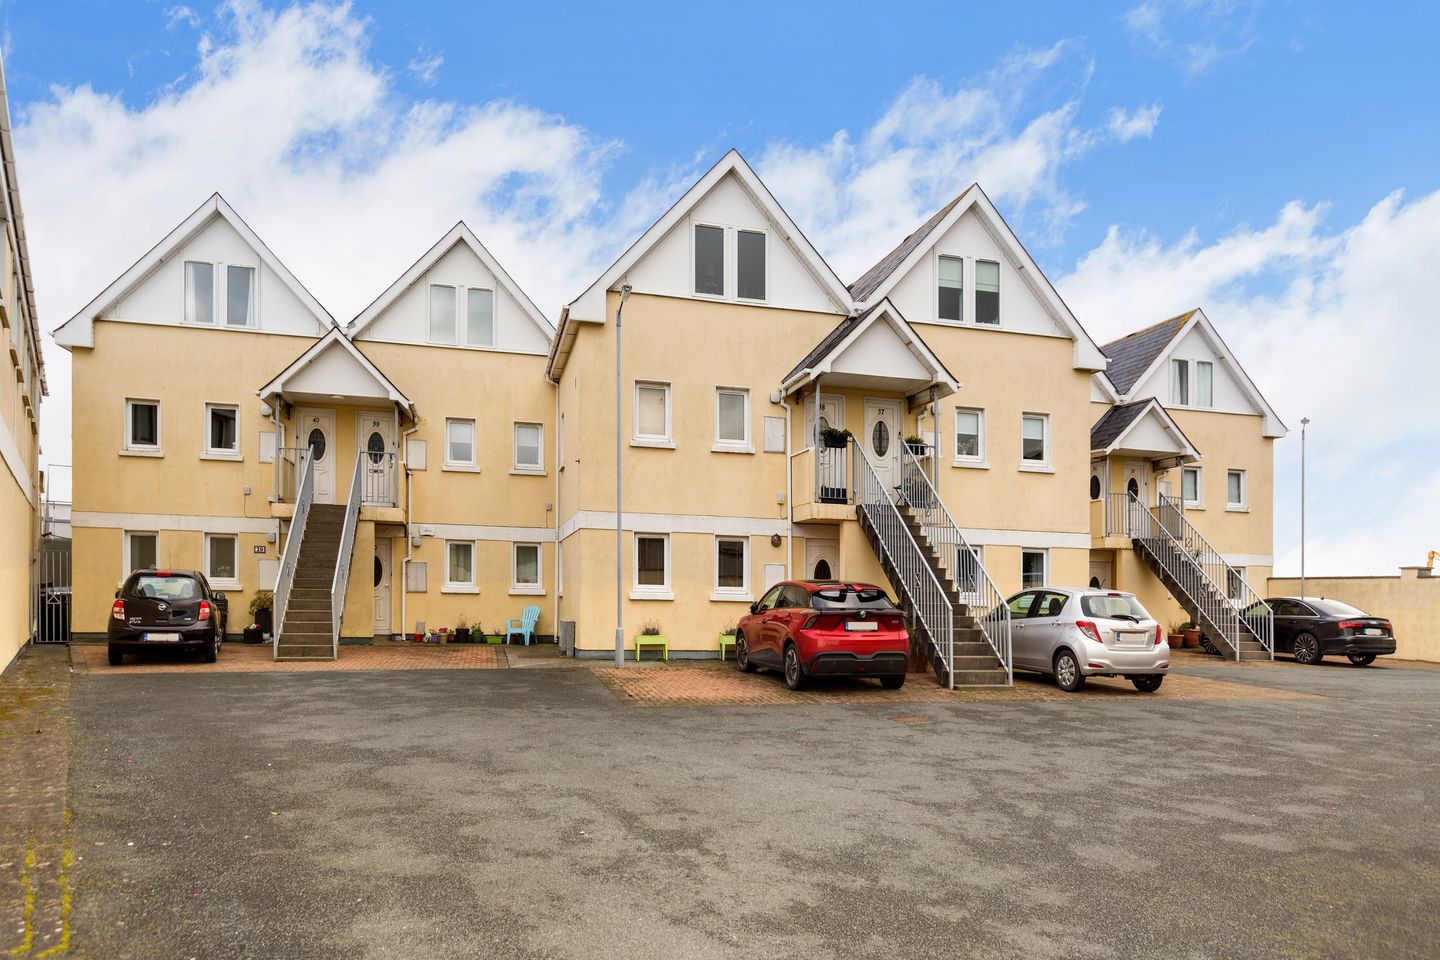 39 The Anchorage, Wicklow Town, Co. Wicklow, A67D216